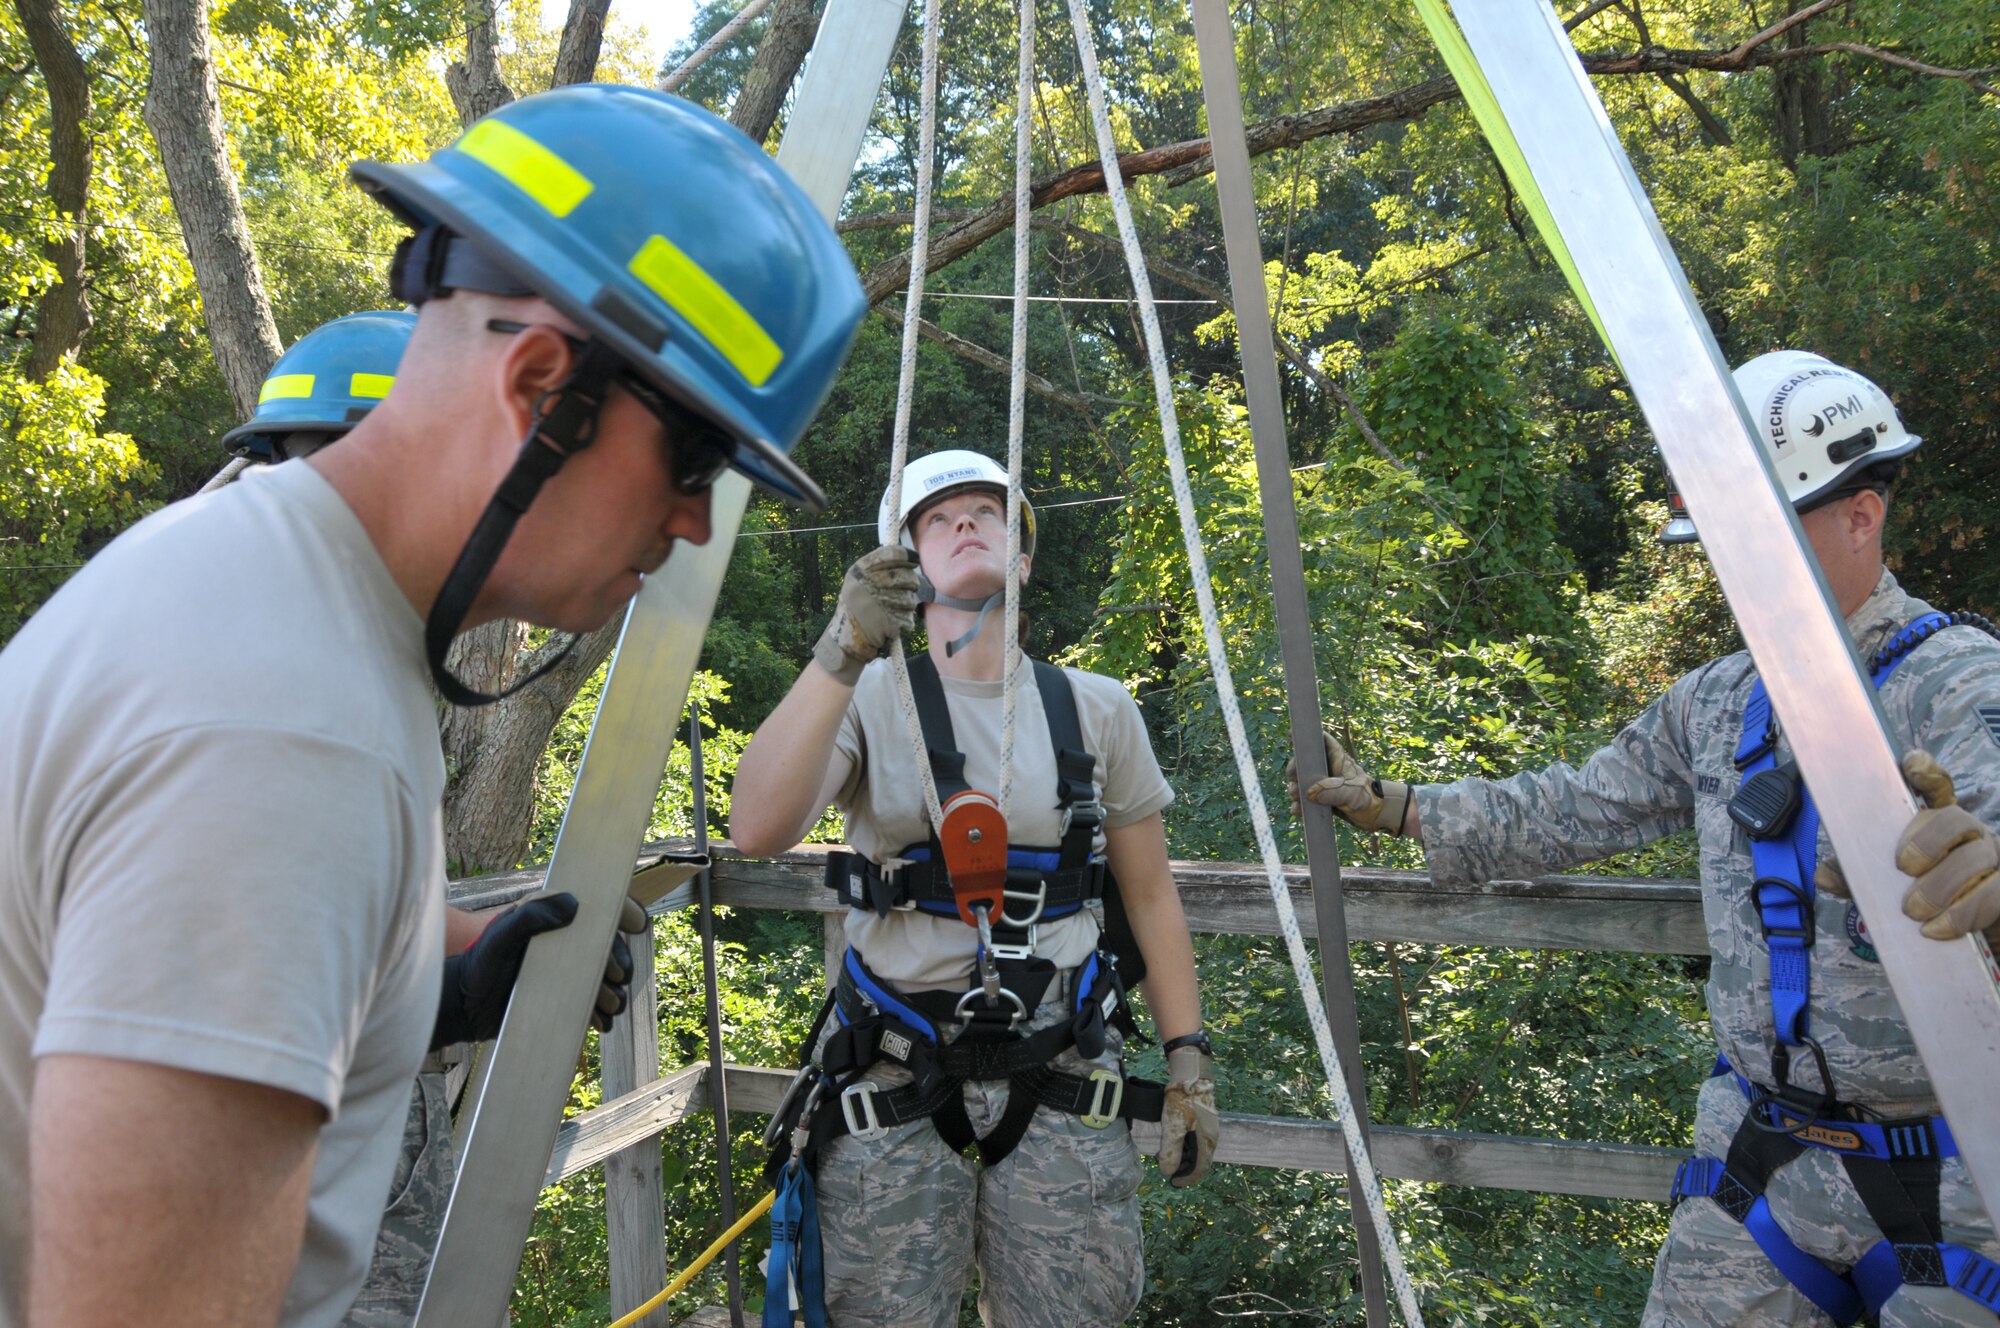 The 109th Fire Department's search and rescue team prepare to lower Staff Sgt. Jennifer Bristol during confined space training for the team at Stratton Air National Guard Base, New York, on Sept. 17, 2015. The 12-person search and rescue team trains monthly on various rescue techniques. (U.S. Air National Guard photo by Tech. Sgt. Catharine Schmidt/Released)